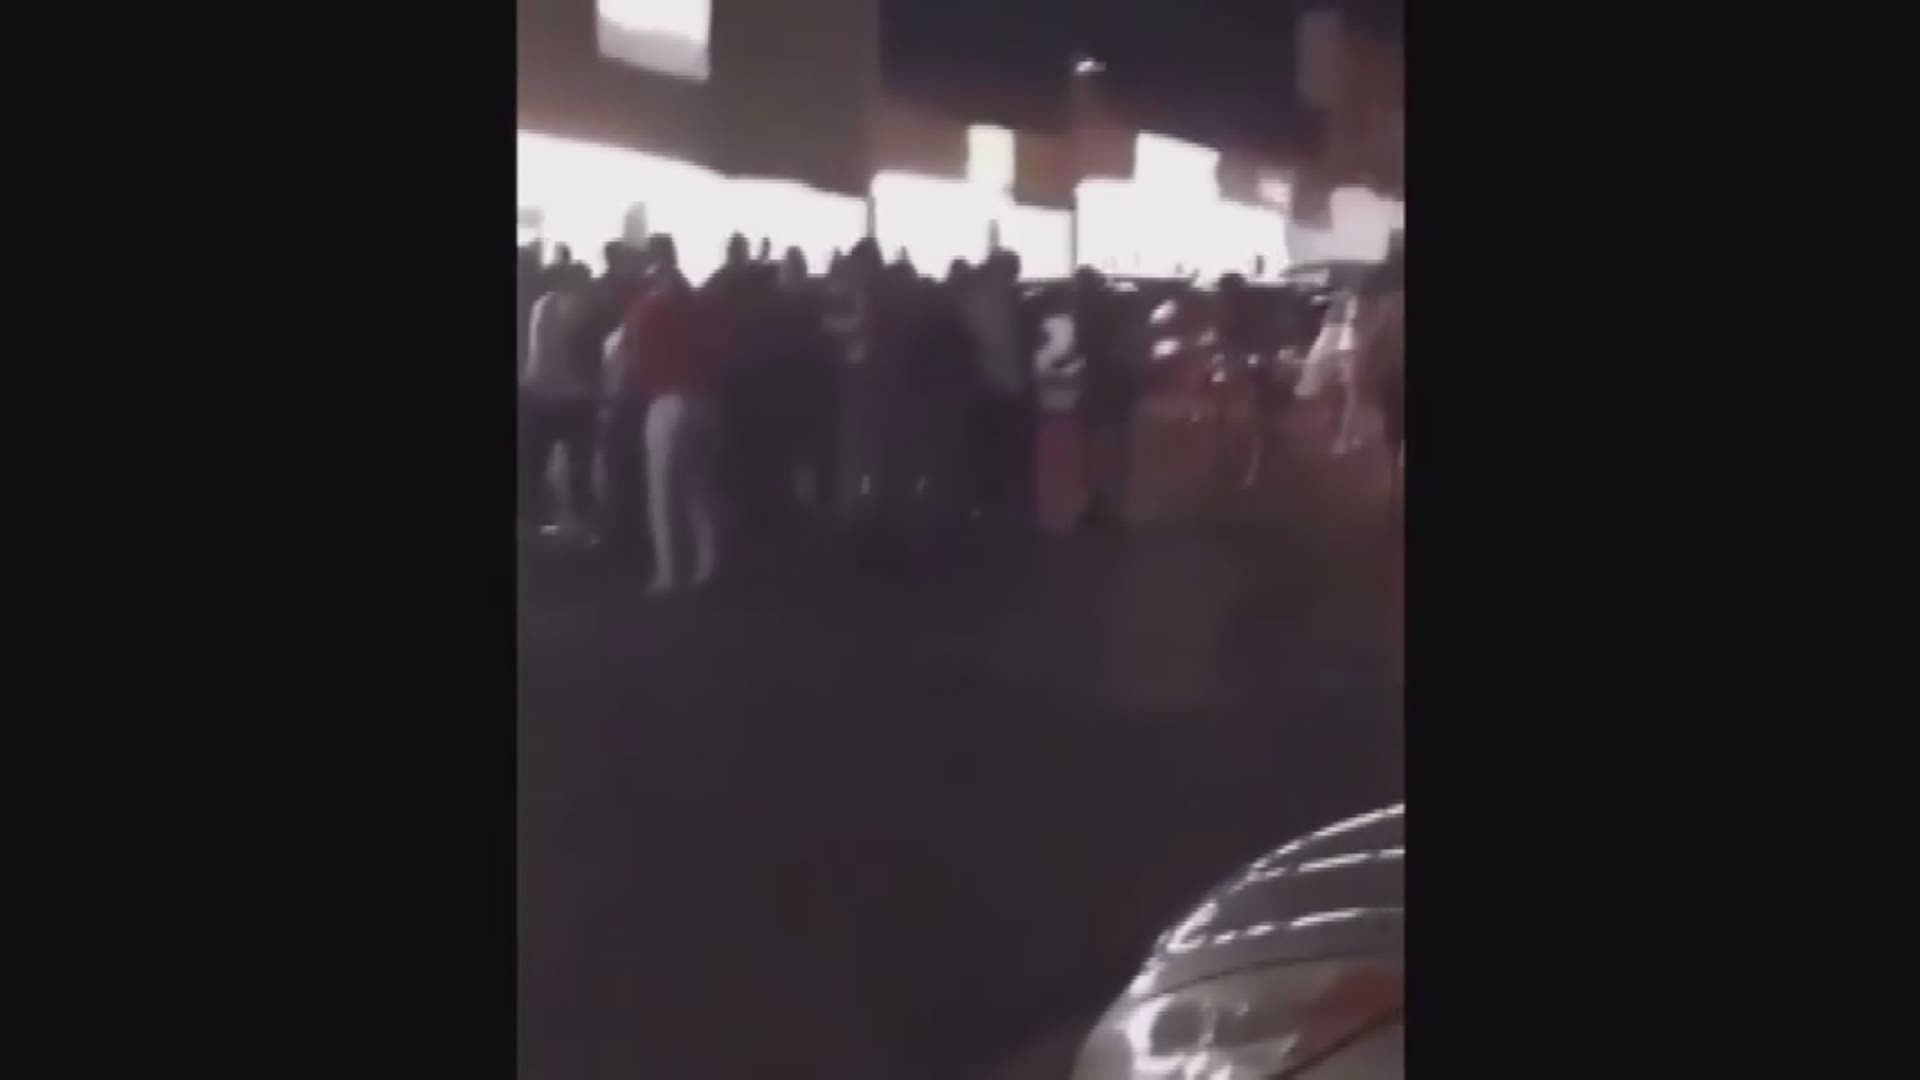 A fight started inside a Copperas Cove pool hall, then spilled into the parking lot where the shooting happened. The two people who were shot were treated for non-life threatening injuries at AdventHealth, police said. Video courtesy of TeyK (@modern.money on Instagram).